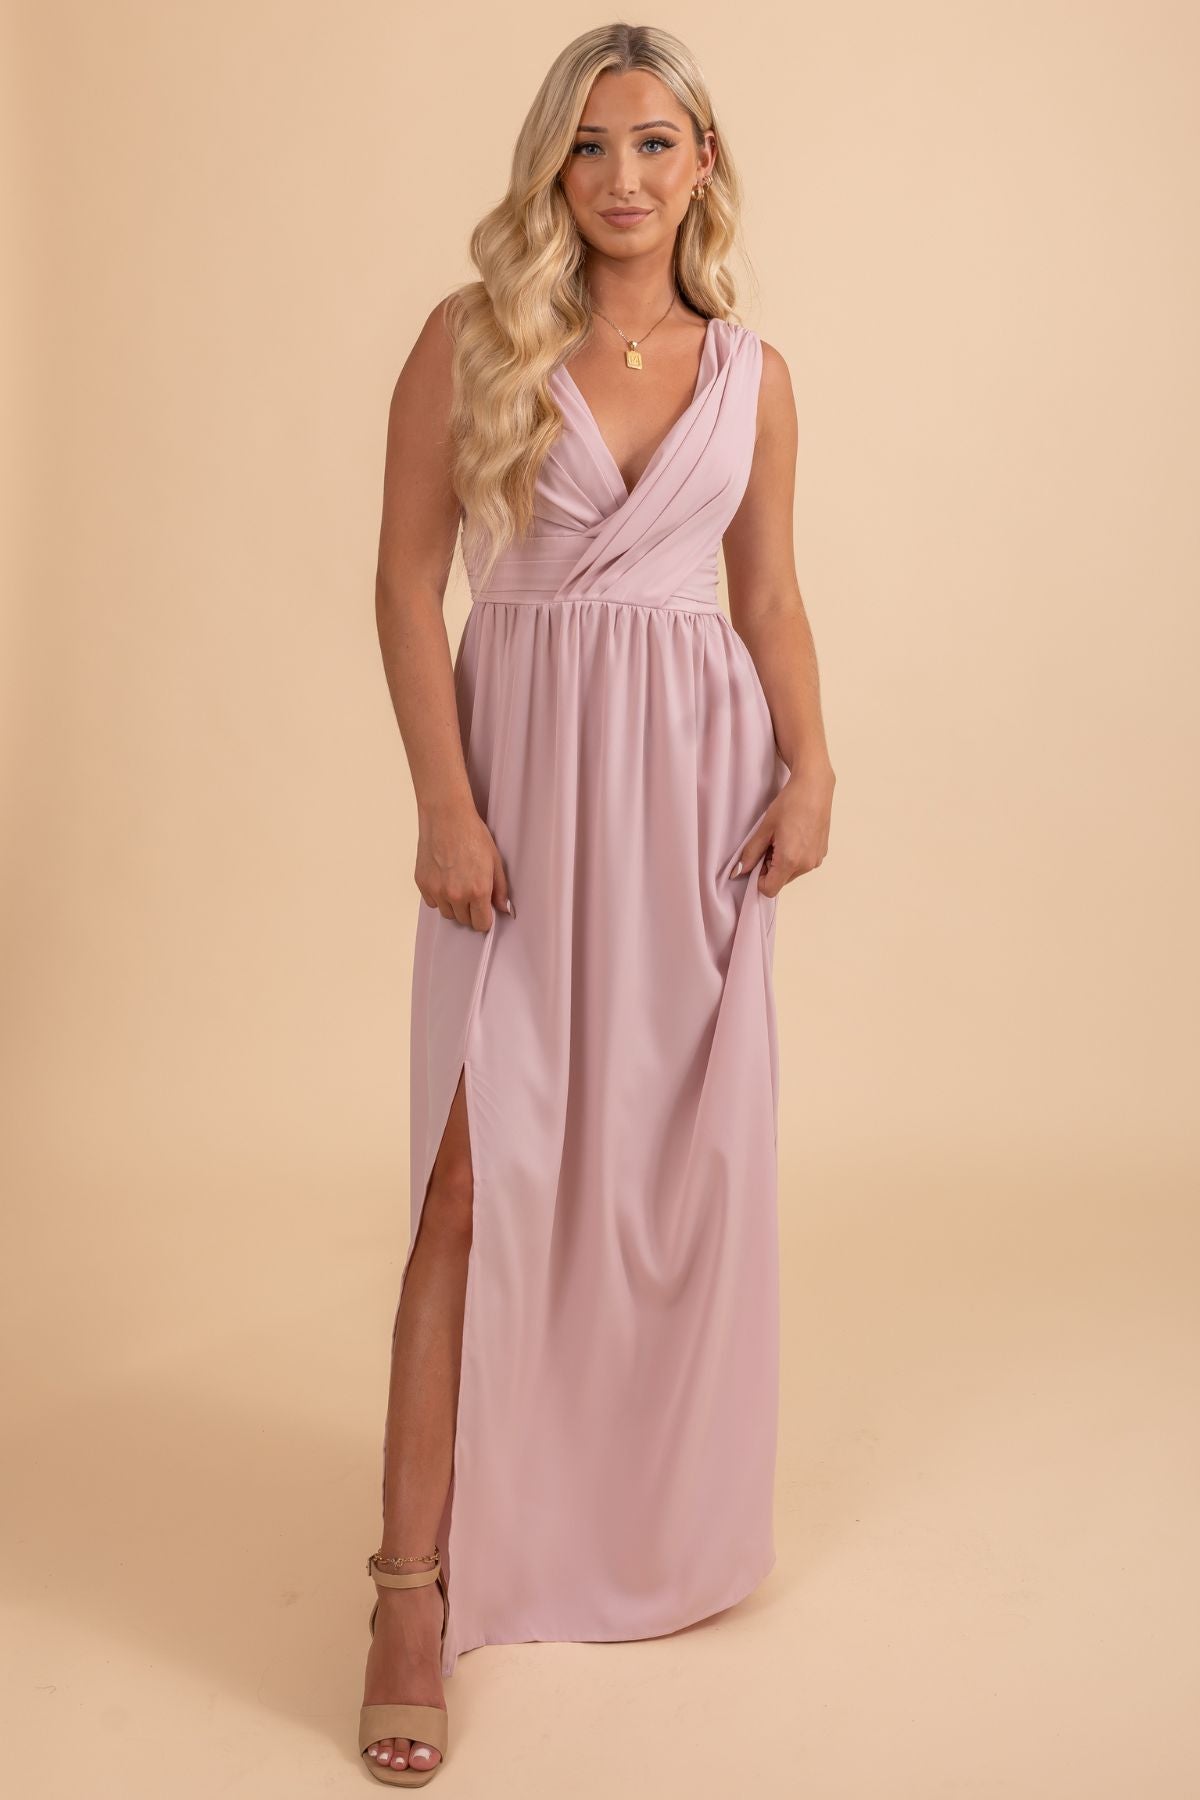 Only For Me Maxi Dress